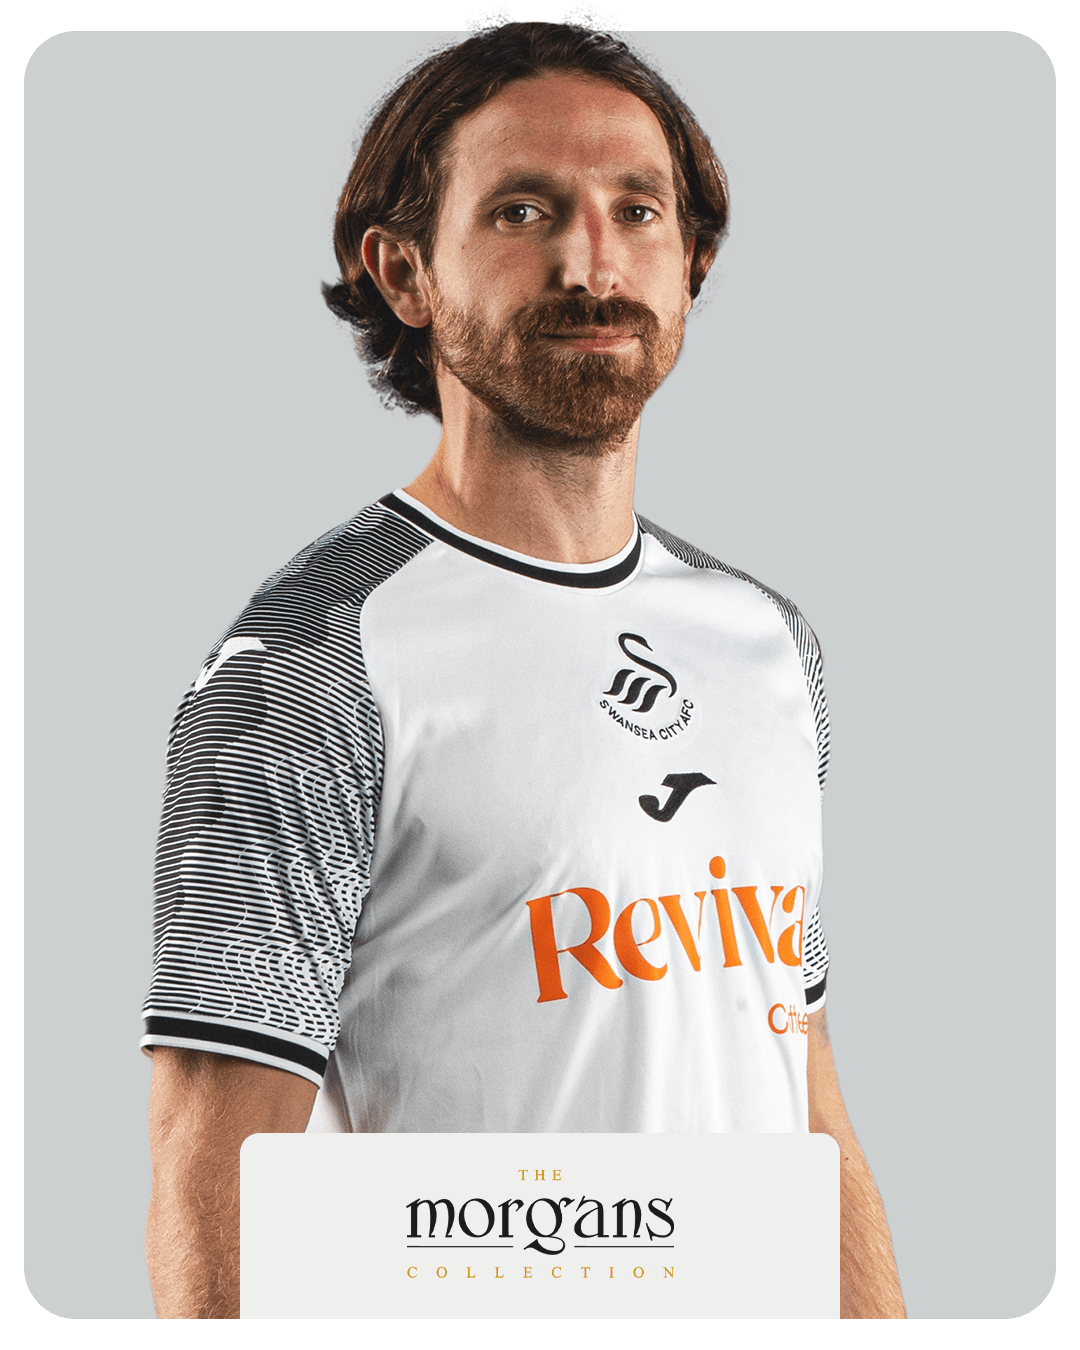 Joe Allen, Sponsored by The Morgans Collection